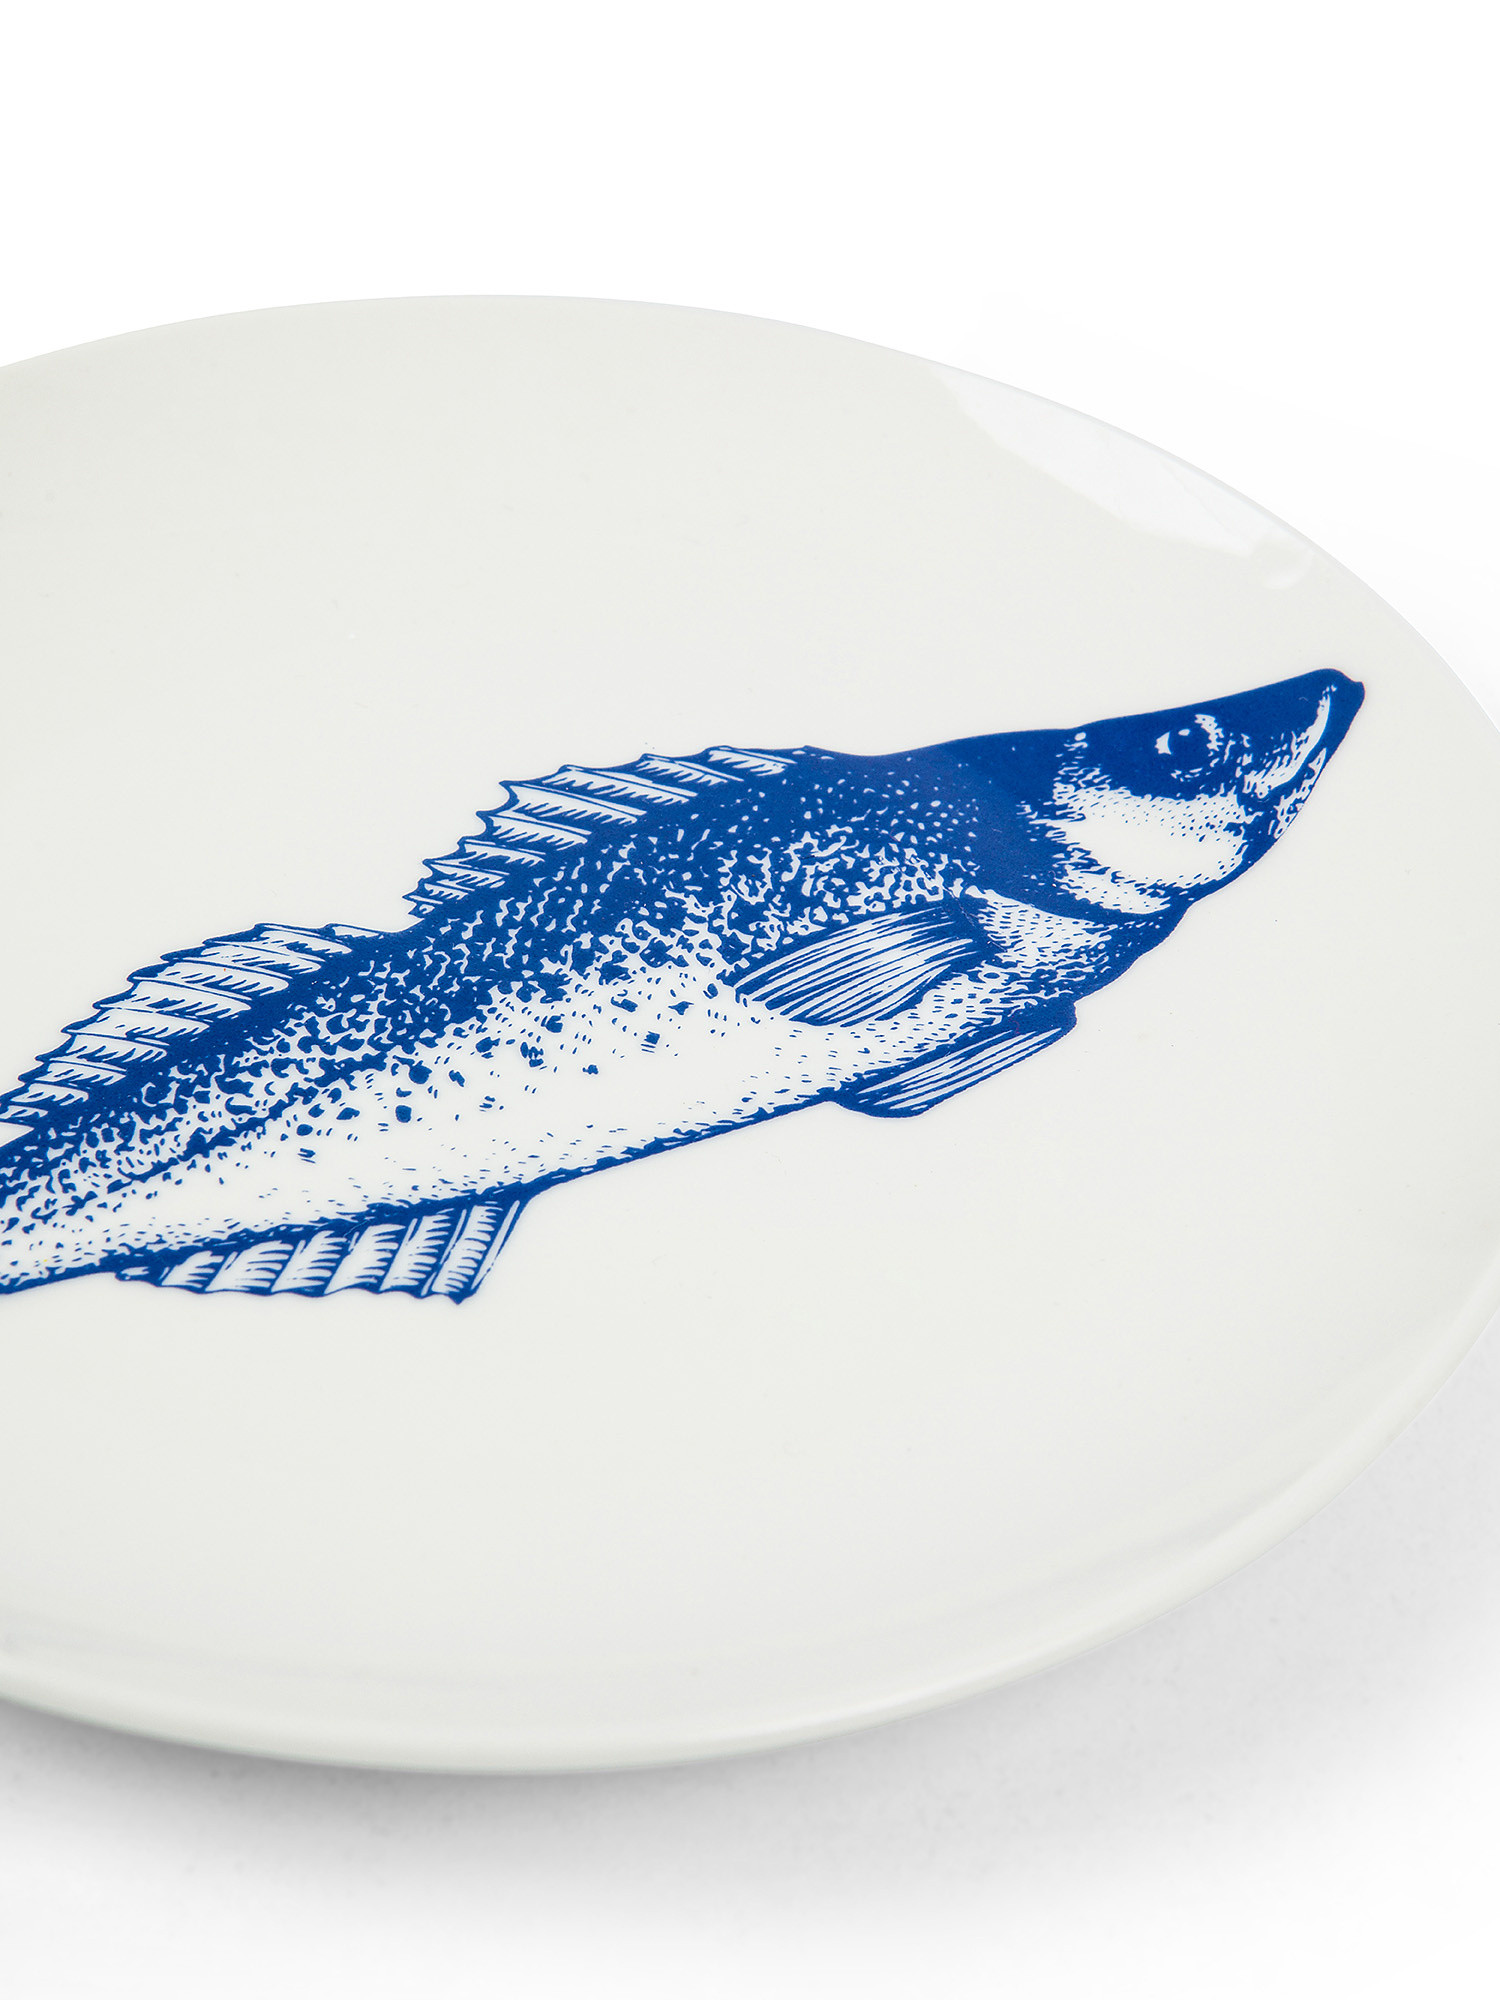 New bone china bread plate with fish motif, White, large image number 1